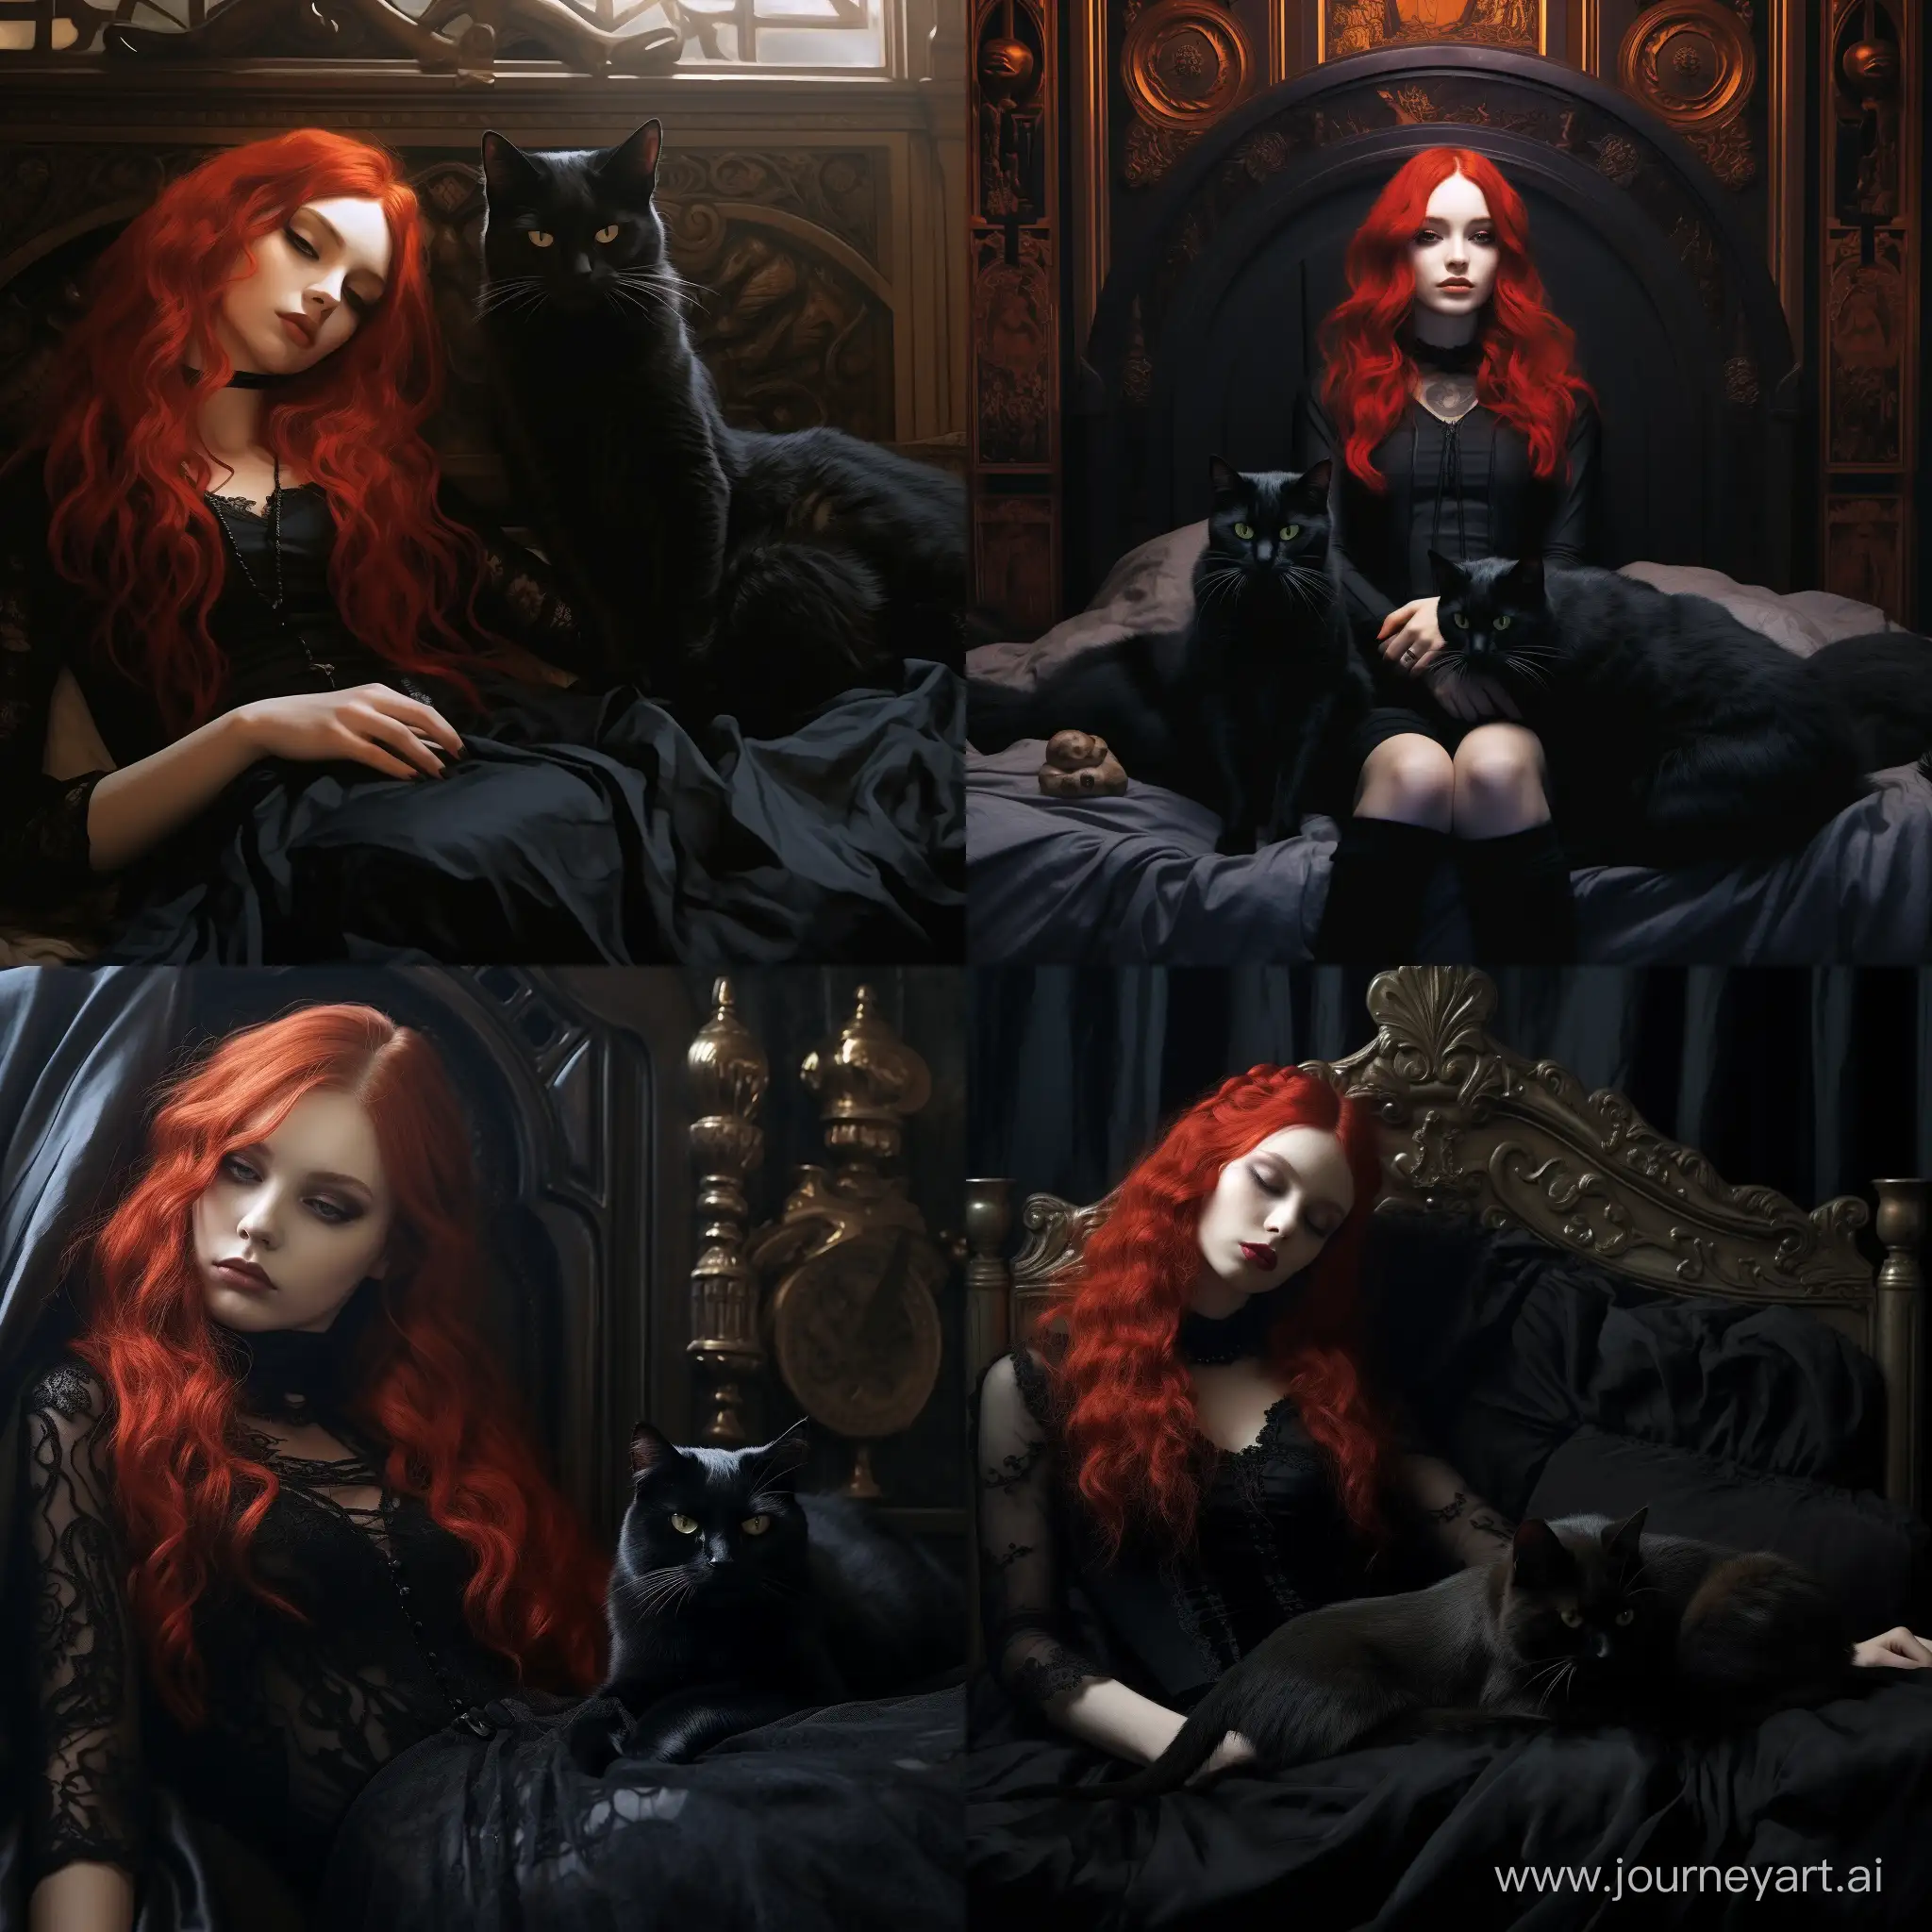 Enchanting-Slumber-RedHaired-Gothic-Girl-and-Feline-Companion